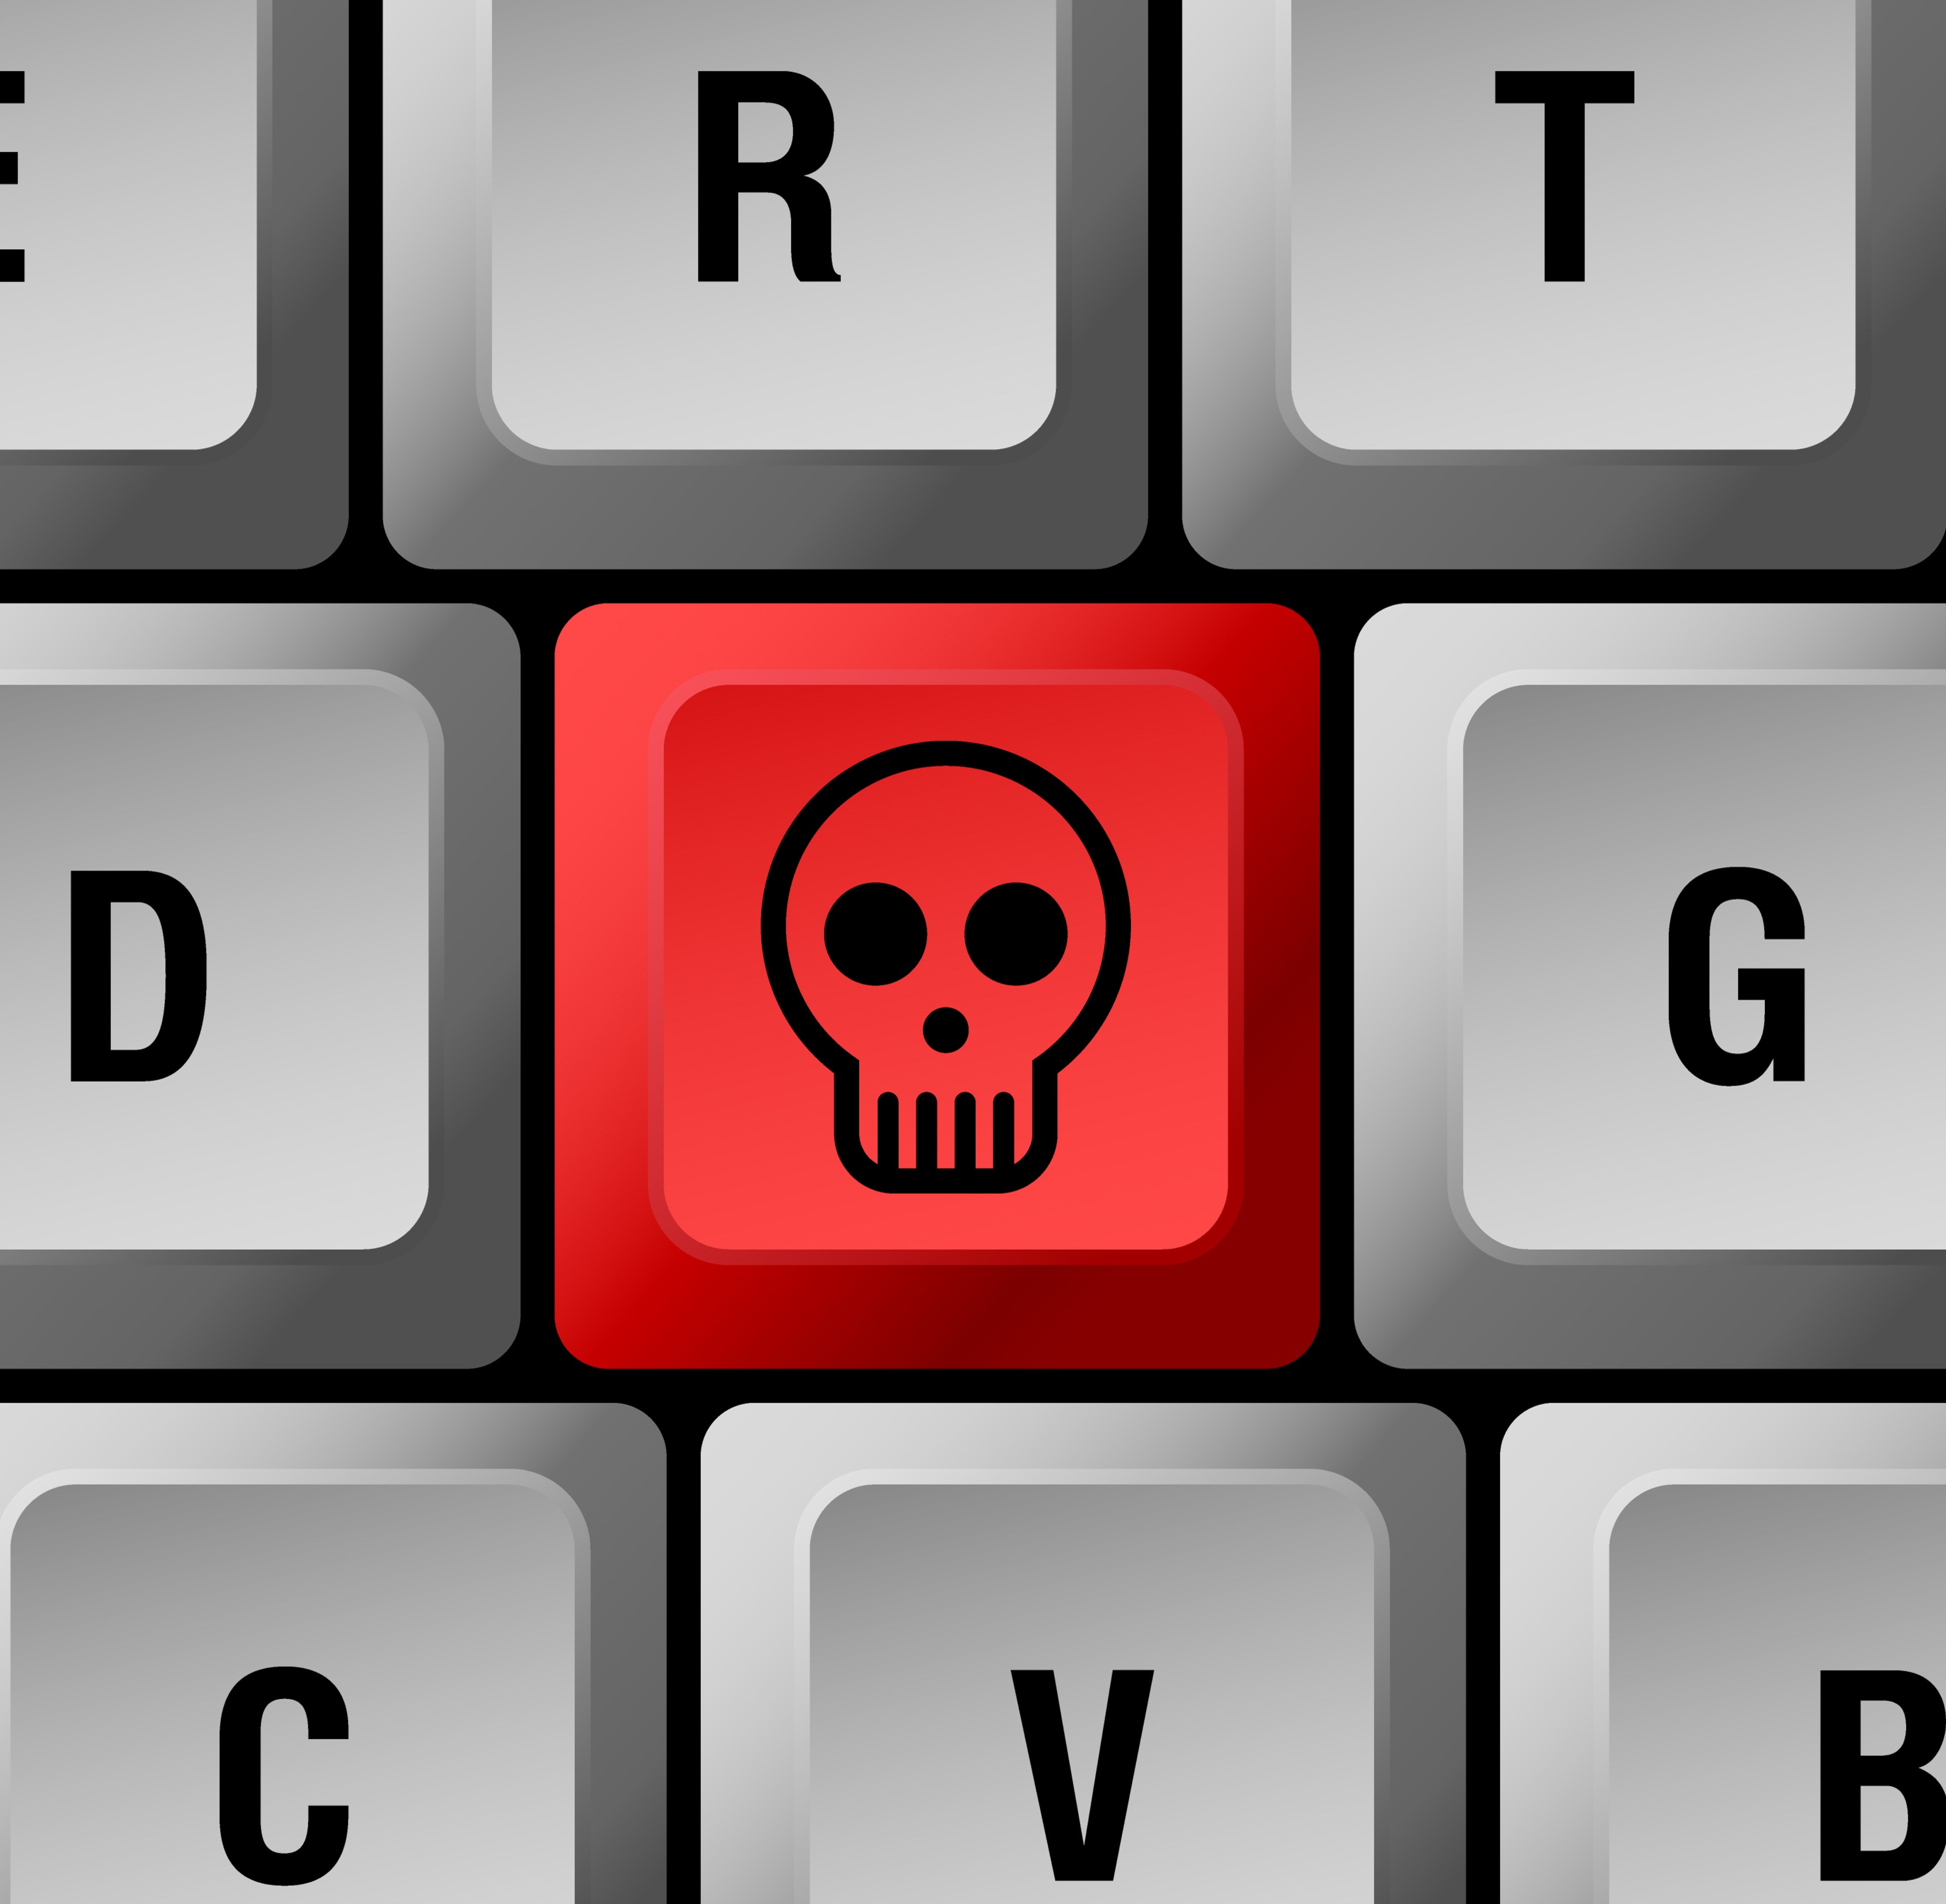 32% of PCs Infected with Malware